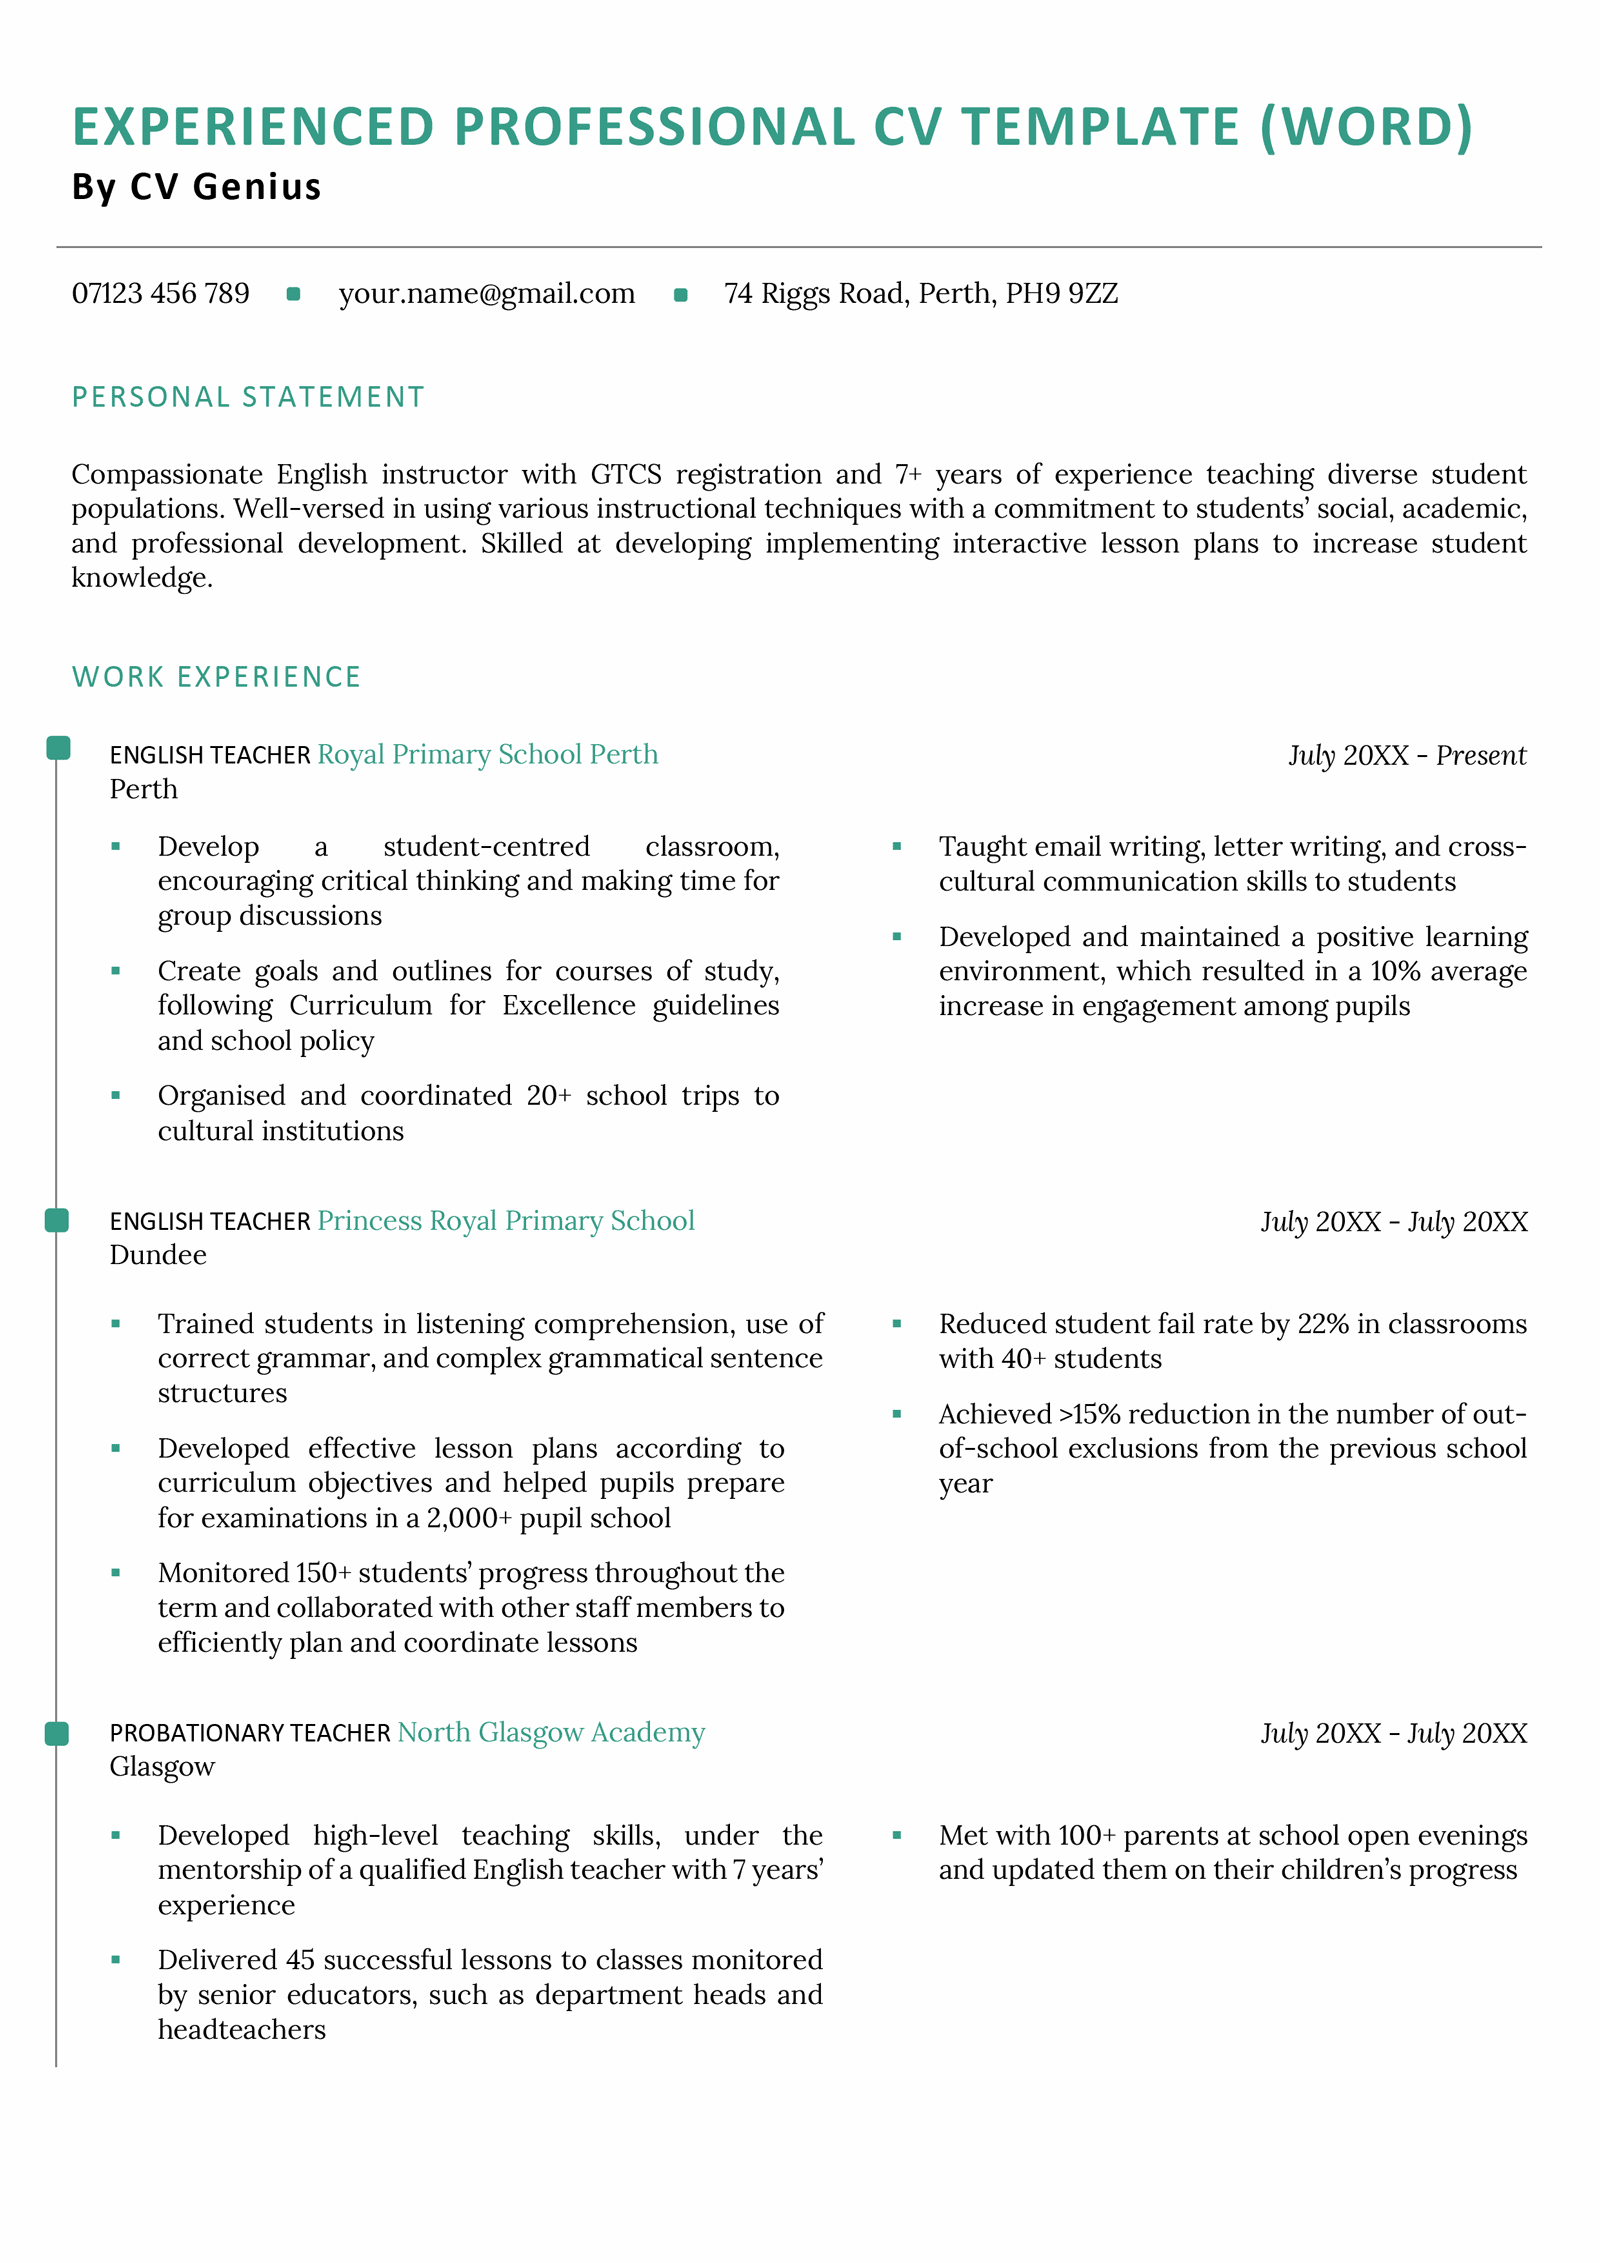 Word CV template for experienced professionals in teal, with a large work experience section highlighting a candidate's career progression. 